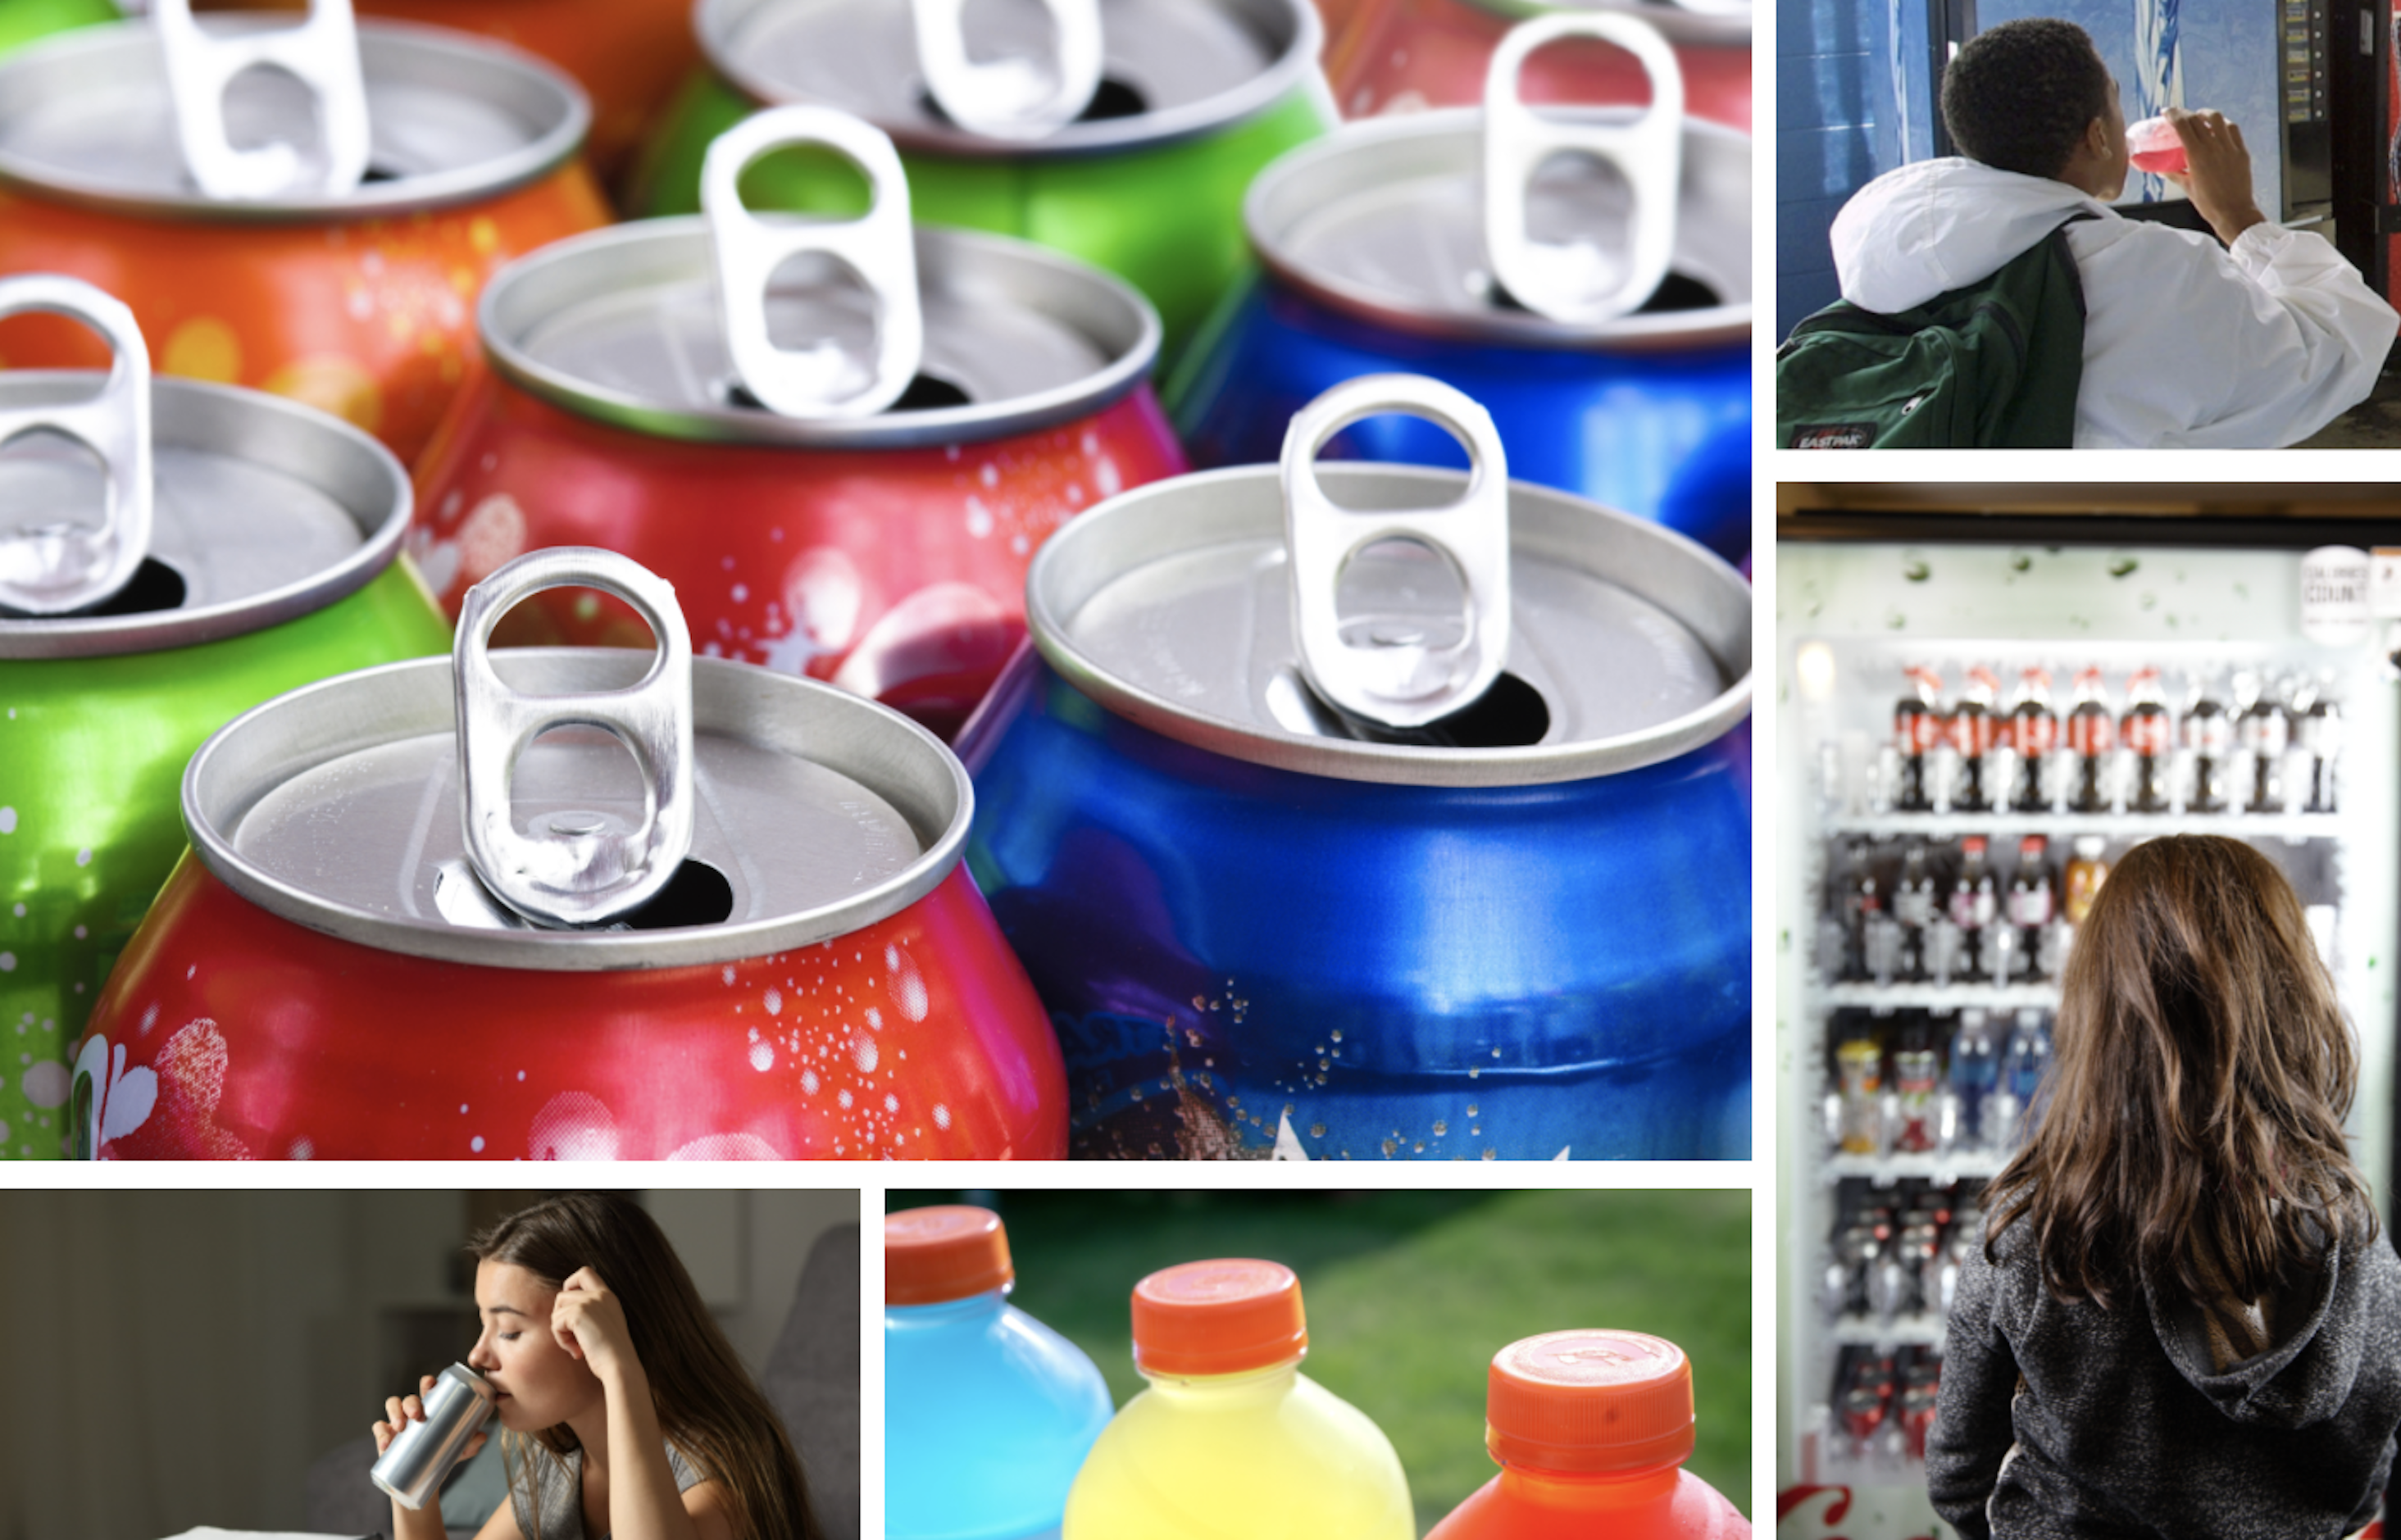 FCollage of various types of sugary drinks